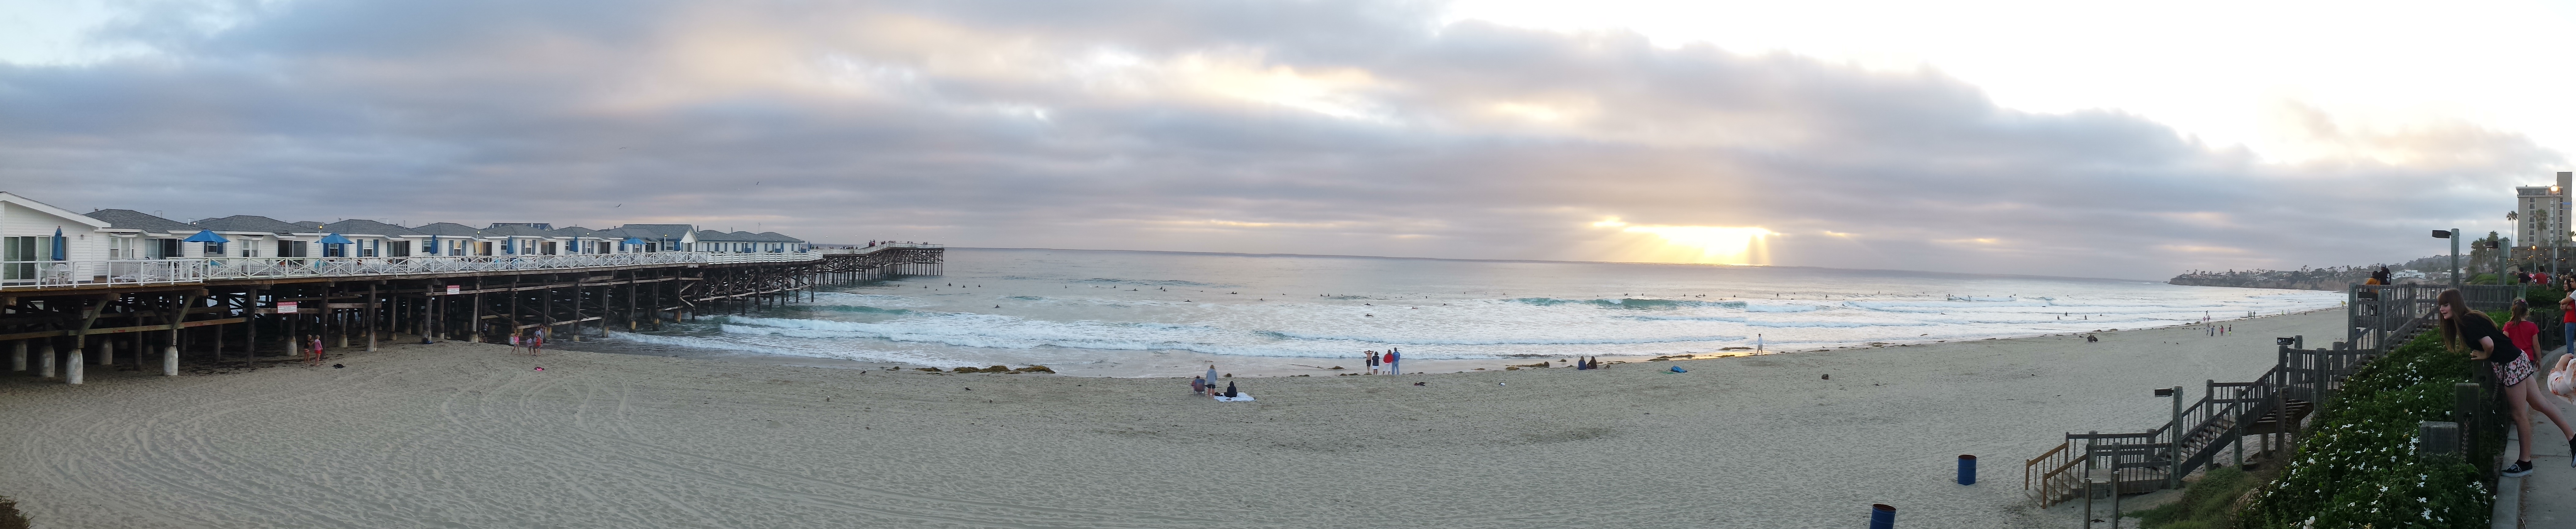 Pacific Beach San Diego - Time To Get Away - Beaches